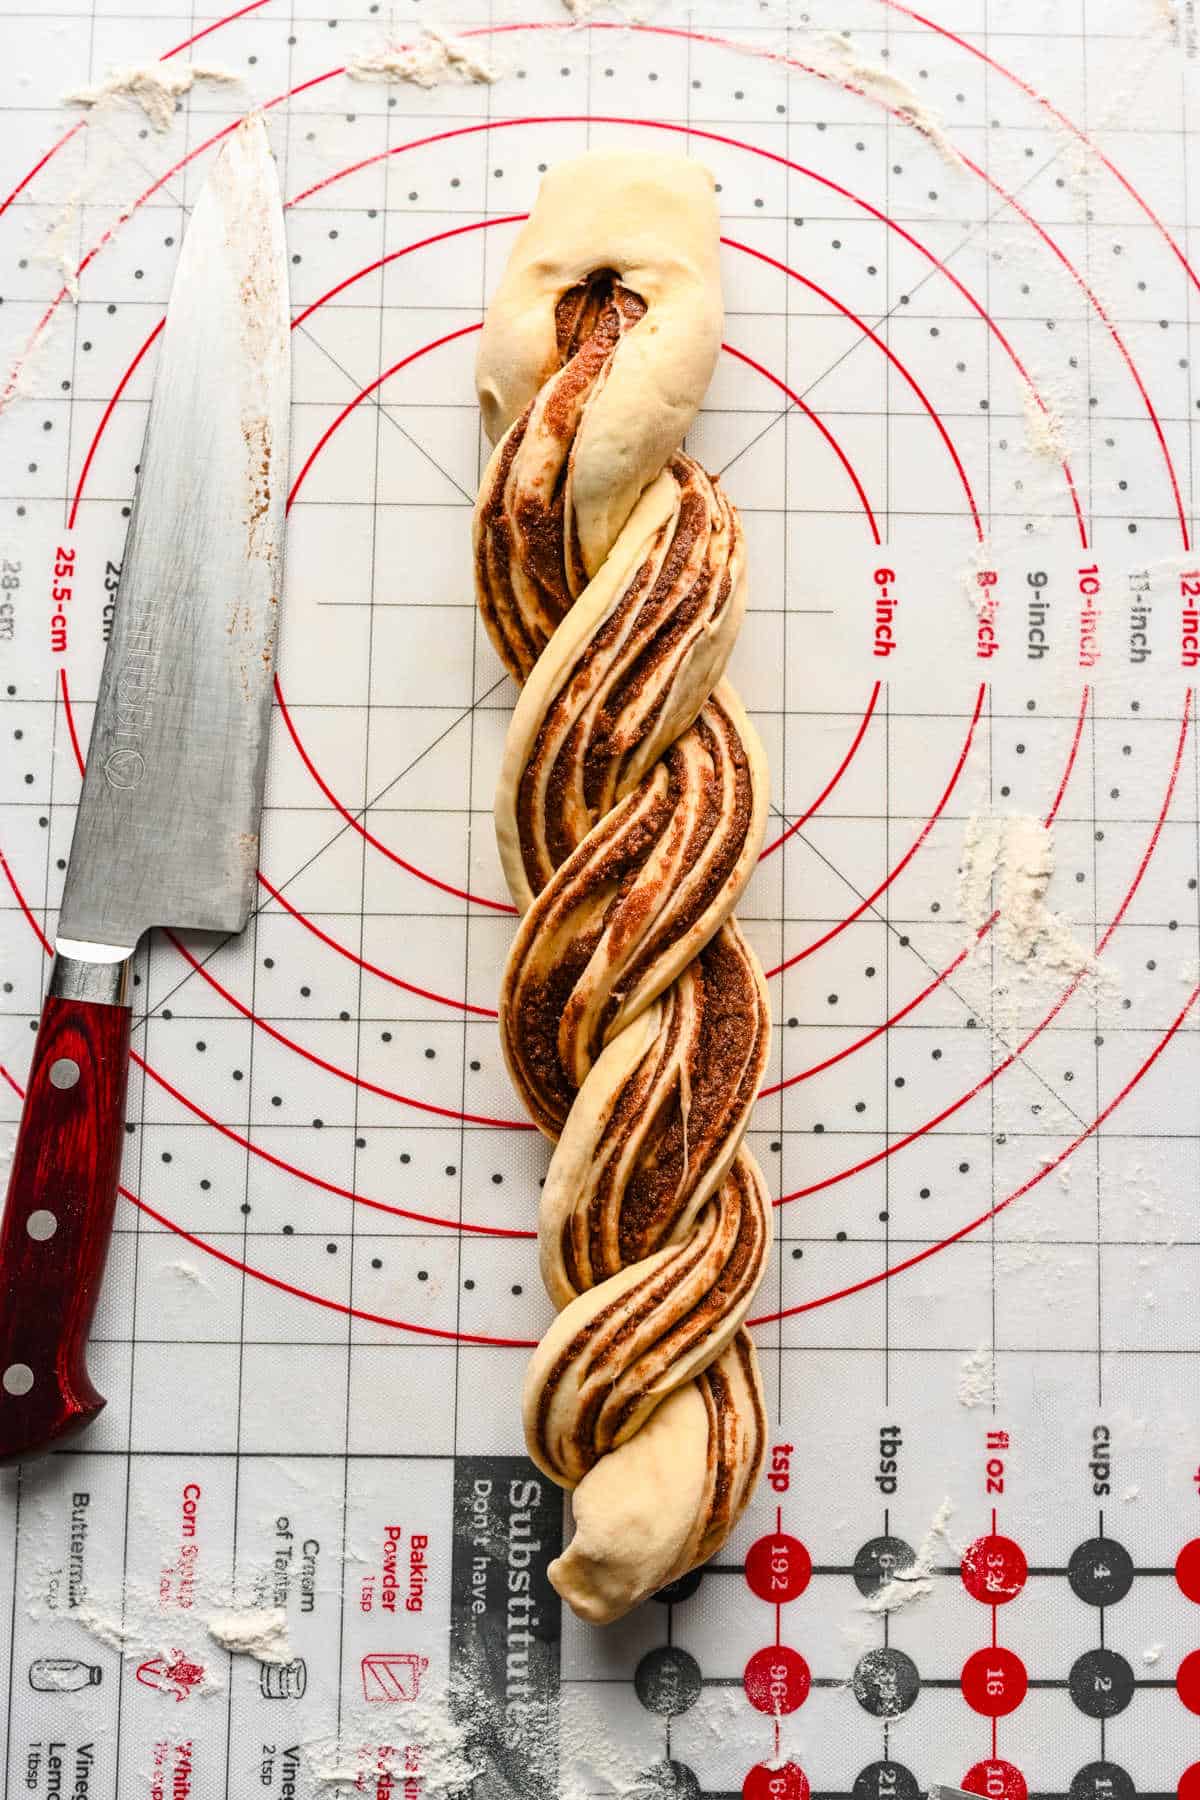 Braided cinnamon bread dough twisted over on itself. 